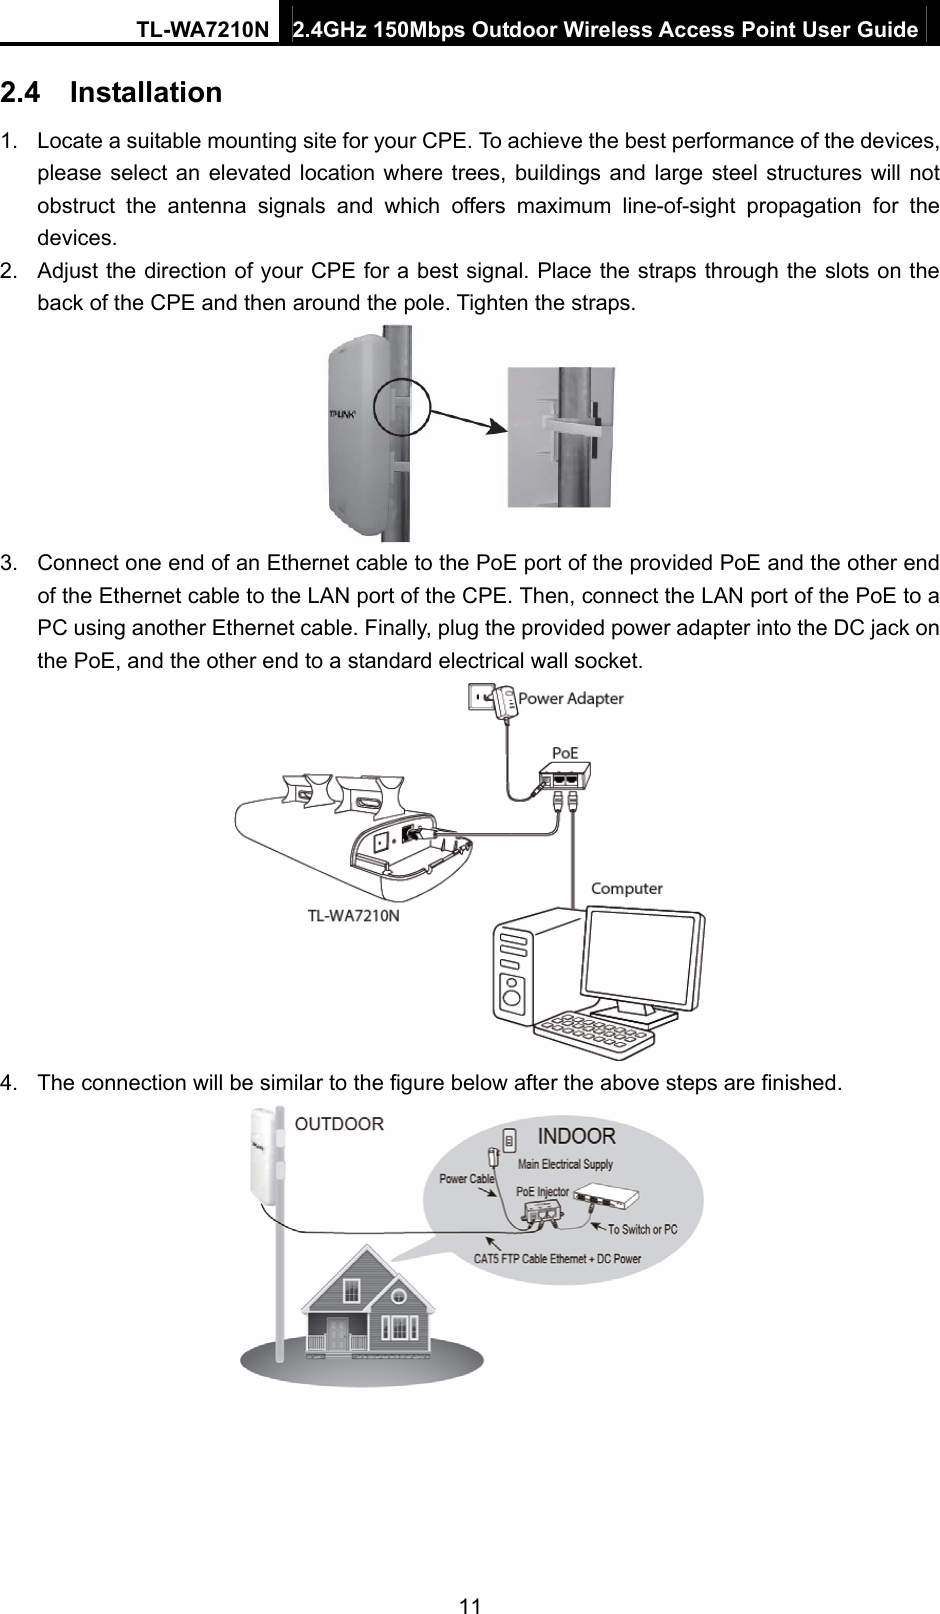 TL-WA7210N  2.4GHz 150Mbps Outdoor Wireless Access Point User Guide 2.4  Installation 1.  Locate a suitable mounting site for your CPE. To achieve the best performance of the devices, please select an elevated location where trees, buildings and large steel structures will not obstruct the antenna signals and which offers maximum line-of-sight propagation for the devices. 2.  Adjust the direction of your CPE for a best signal. Place the straps through the slots on the back of the CPE and then around the pole. Tighten the straps.  3.  Connect one end of an Ethernet cable to the PoE port of the provided PoE and the other end of the Ethernet cable to the LAN port of the CPE. Then, connect the LAN port of the PoE to a PC using another Ethernet cable. Finally, plug the provided power adapter into the DC jack on the PoE, and the other end to a standard electrical wall socket.  4.  The connection will be similar to the figure below after the above steps are finished.  11 